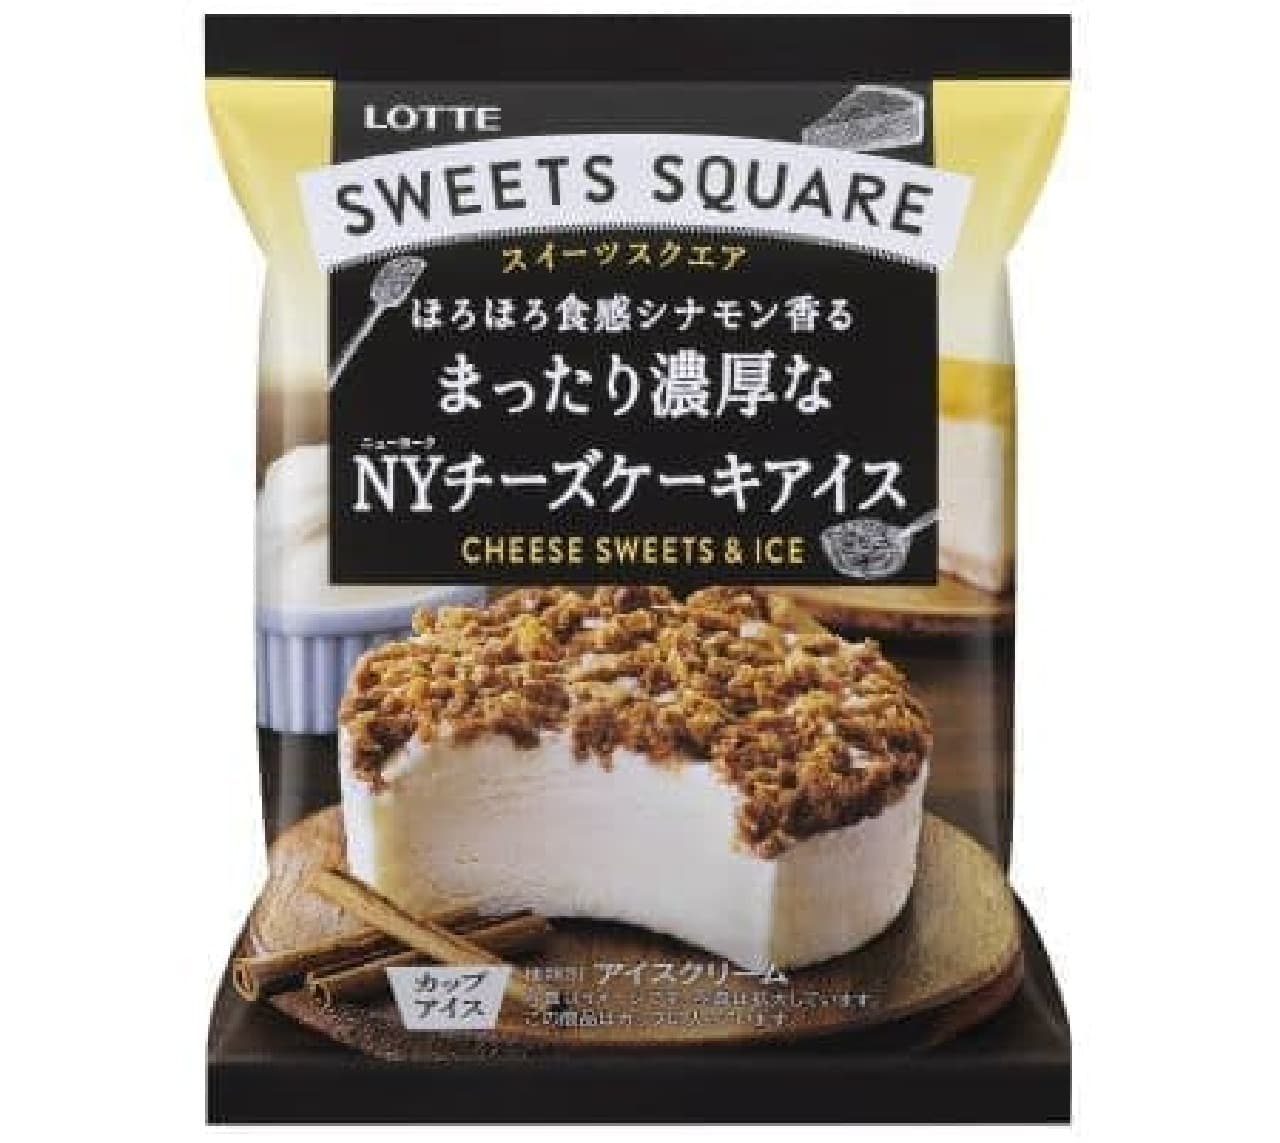 Lotte "SWEETS SQUARE Relaxing and rich NY cheesecake ice cream"